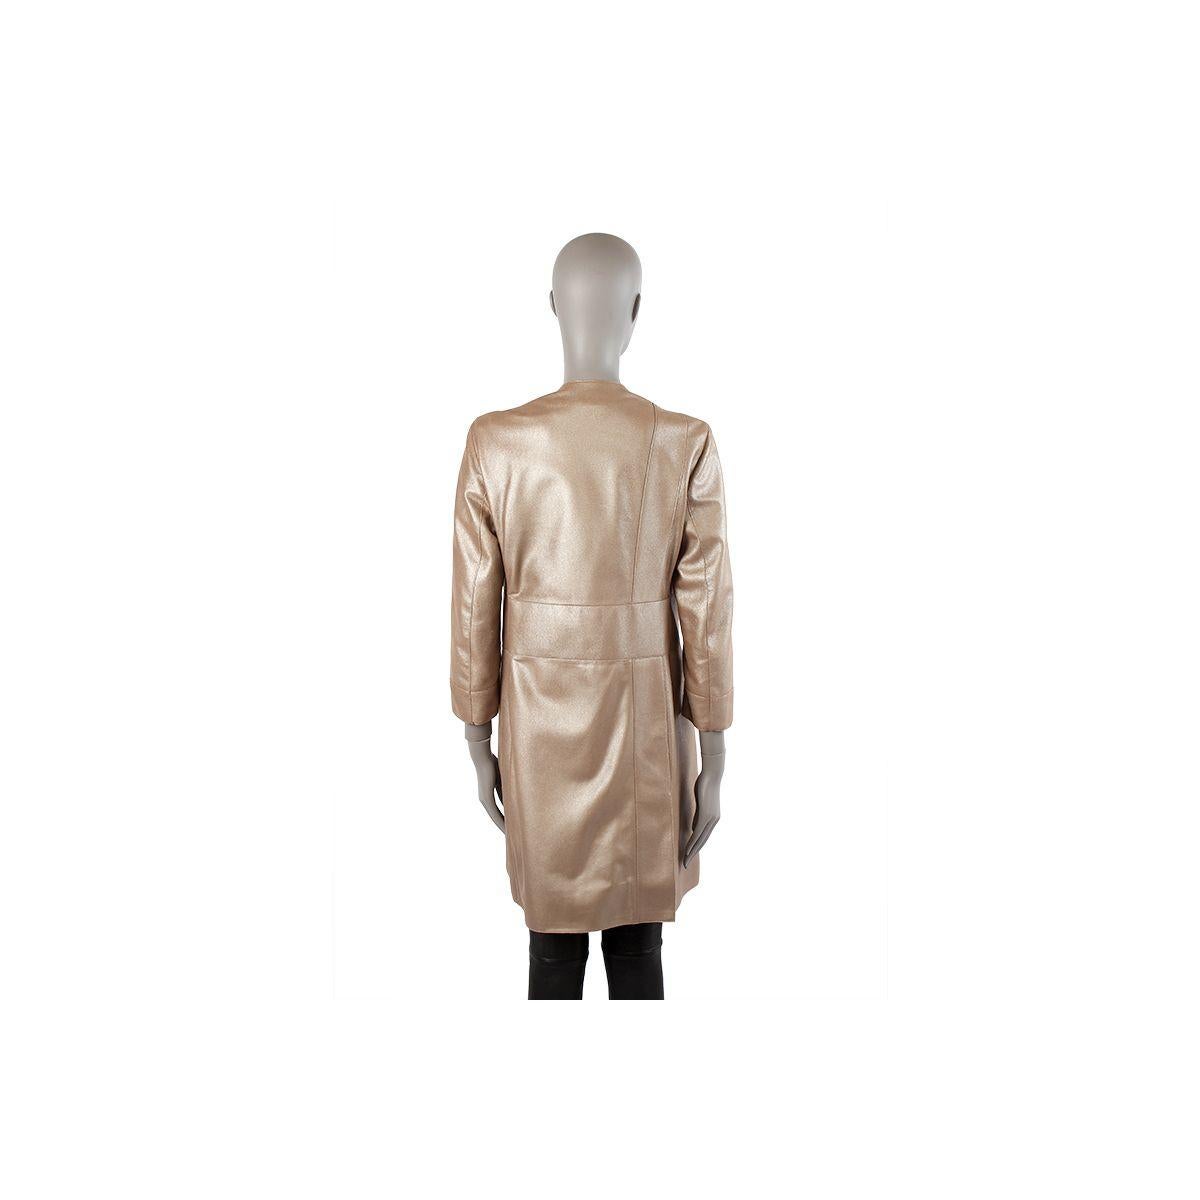 100% authentic AKRIS between-seasons coat in metallic taupe leather. Two slit pockets on the front. Opens with two hidden buttons on the front. Lined in petrol iridescent viscose (55%) and acetate (45%). Has been worn and is in excellent